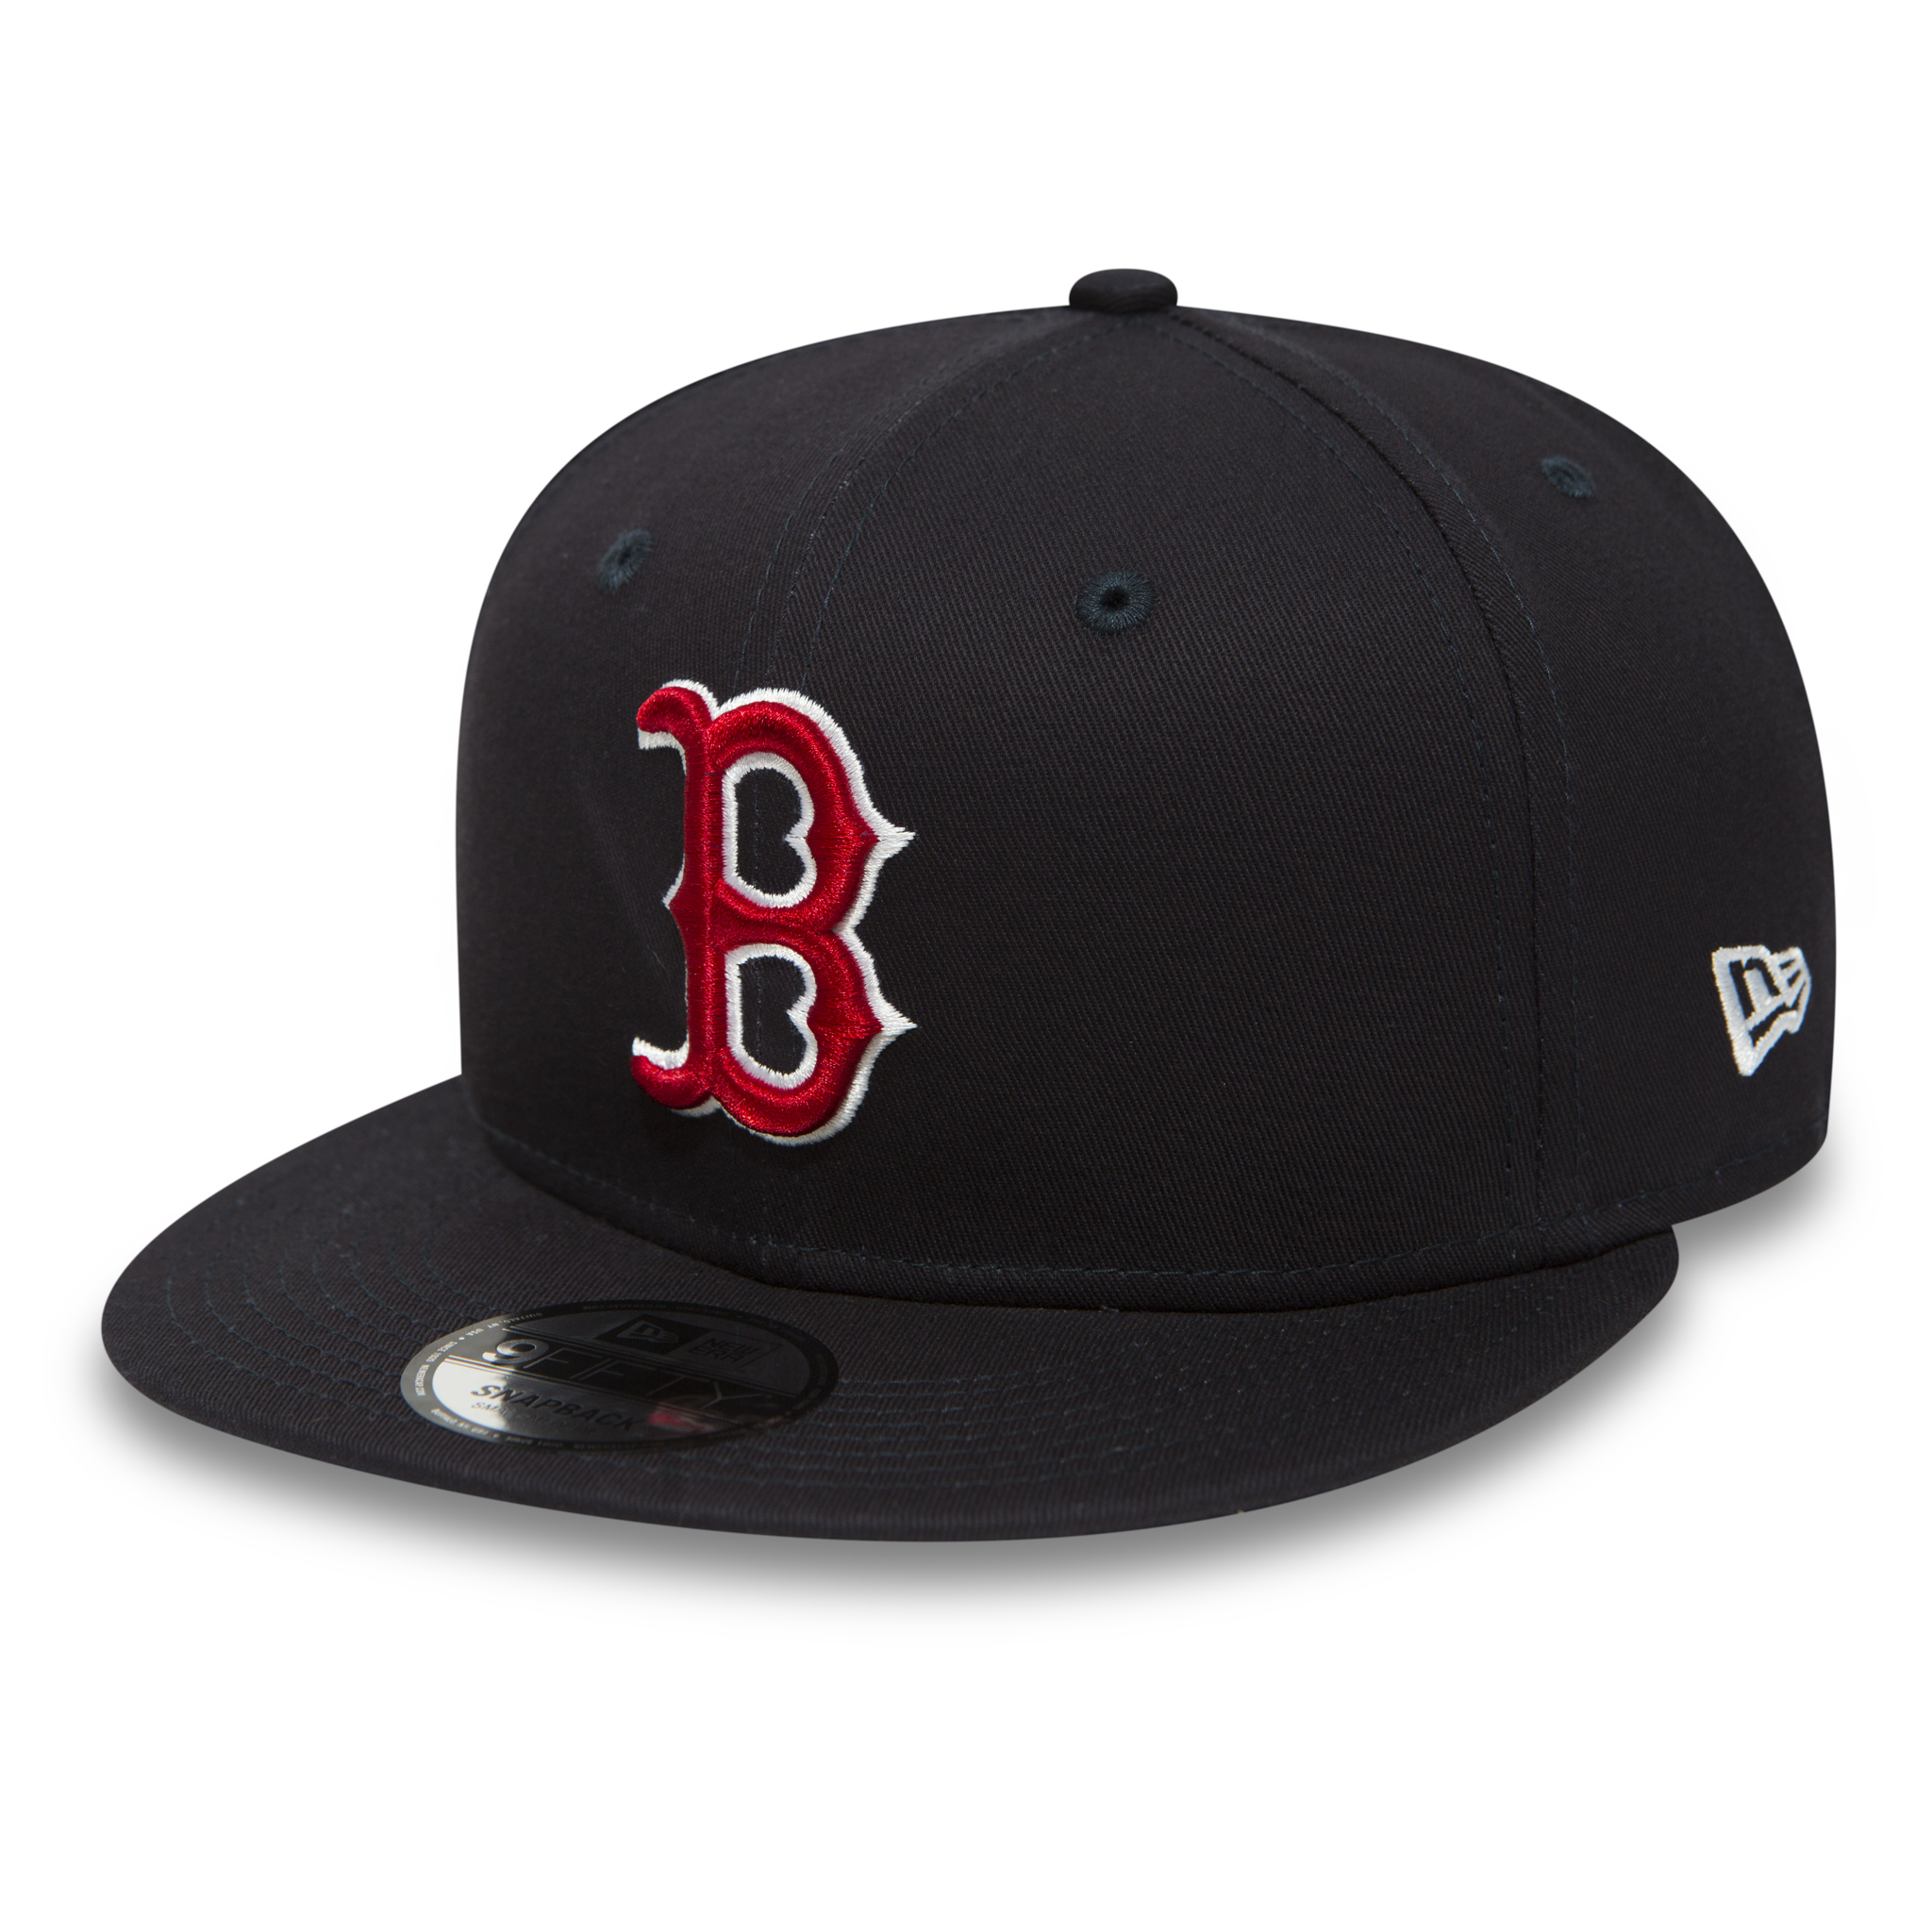 Boston Red Sox Essential Navy 9FIFTY Cap